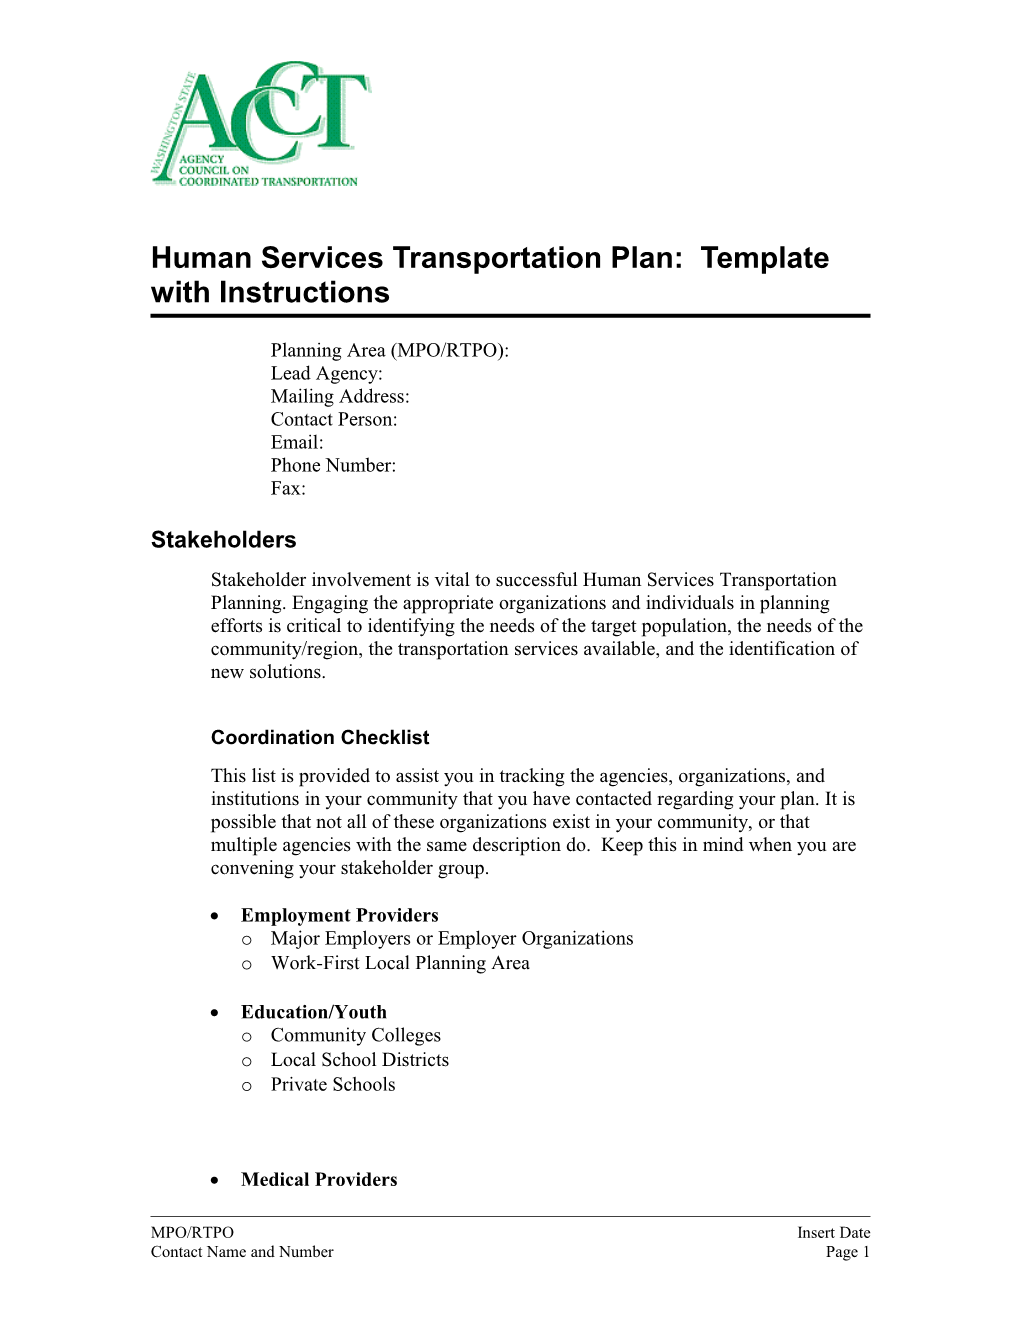 Human Services Transportation Plan: Template with Instructions